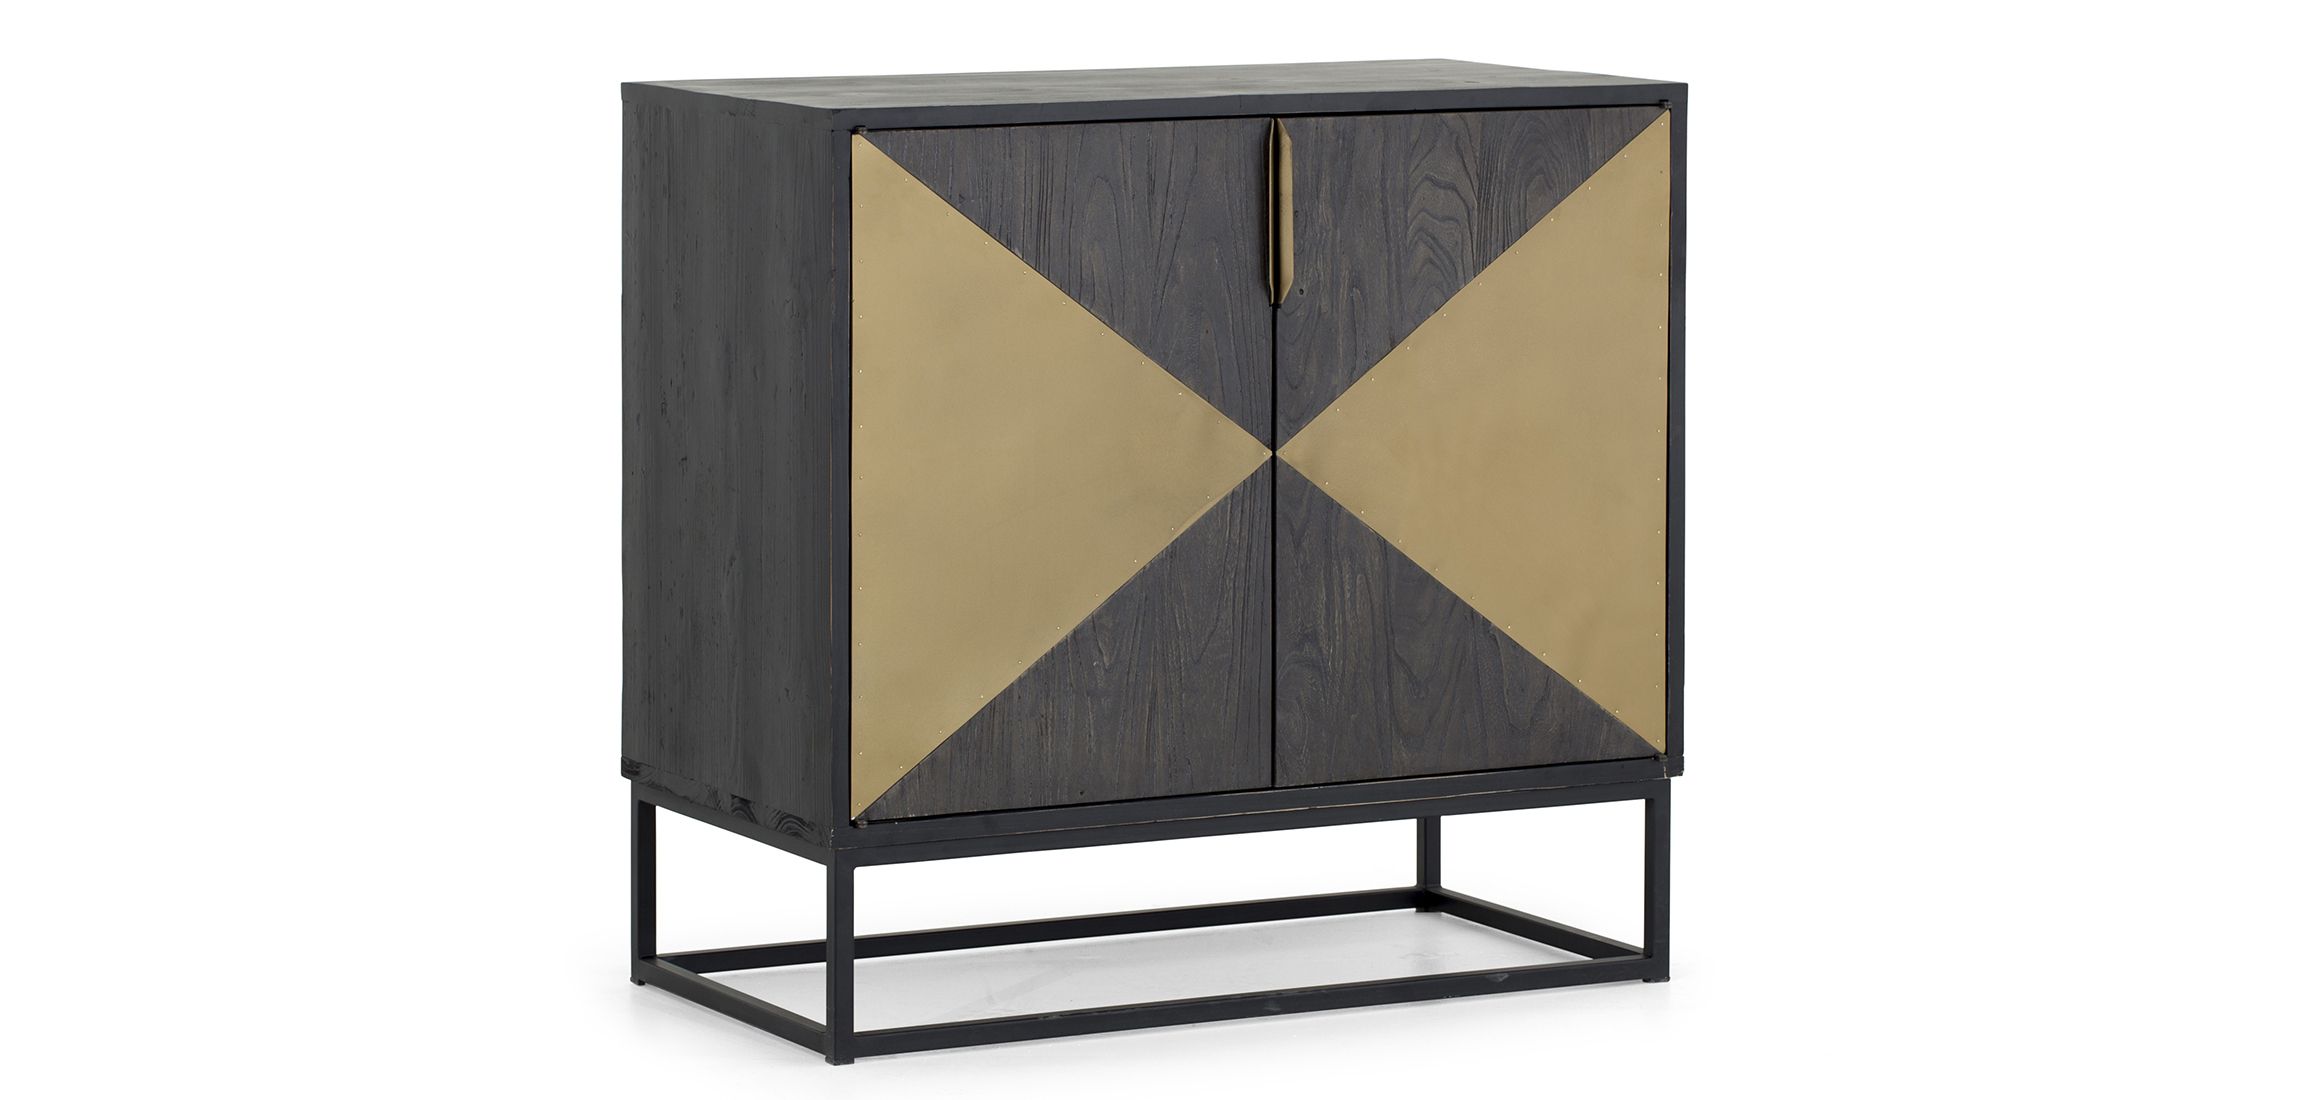 Farnell – Sideboard, 2 Doors | Flamant Inside Current Adkins Sideboards (View 11 of 20)